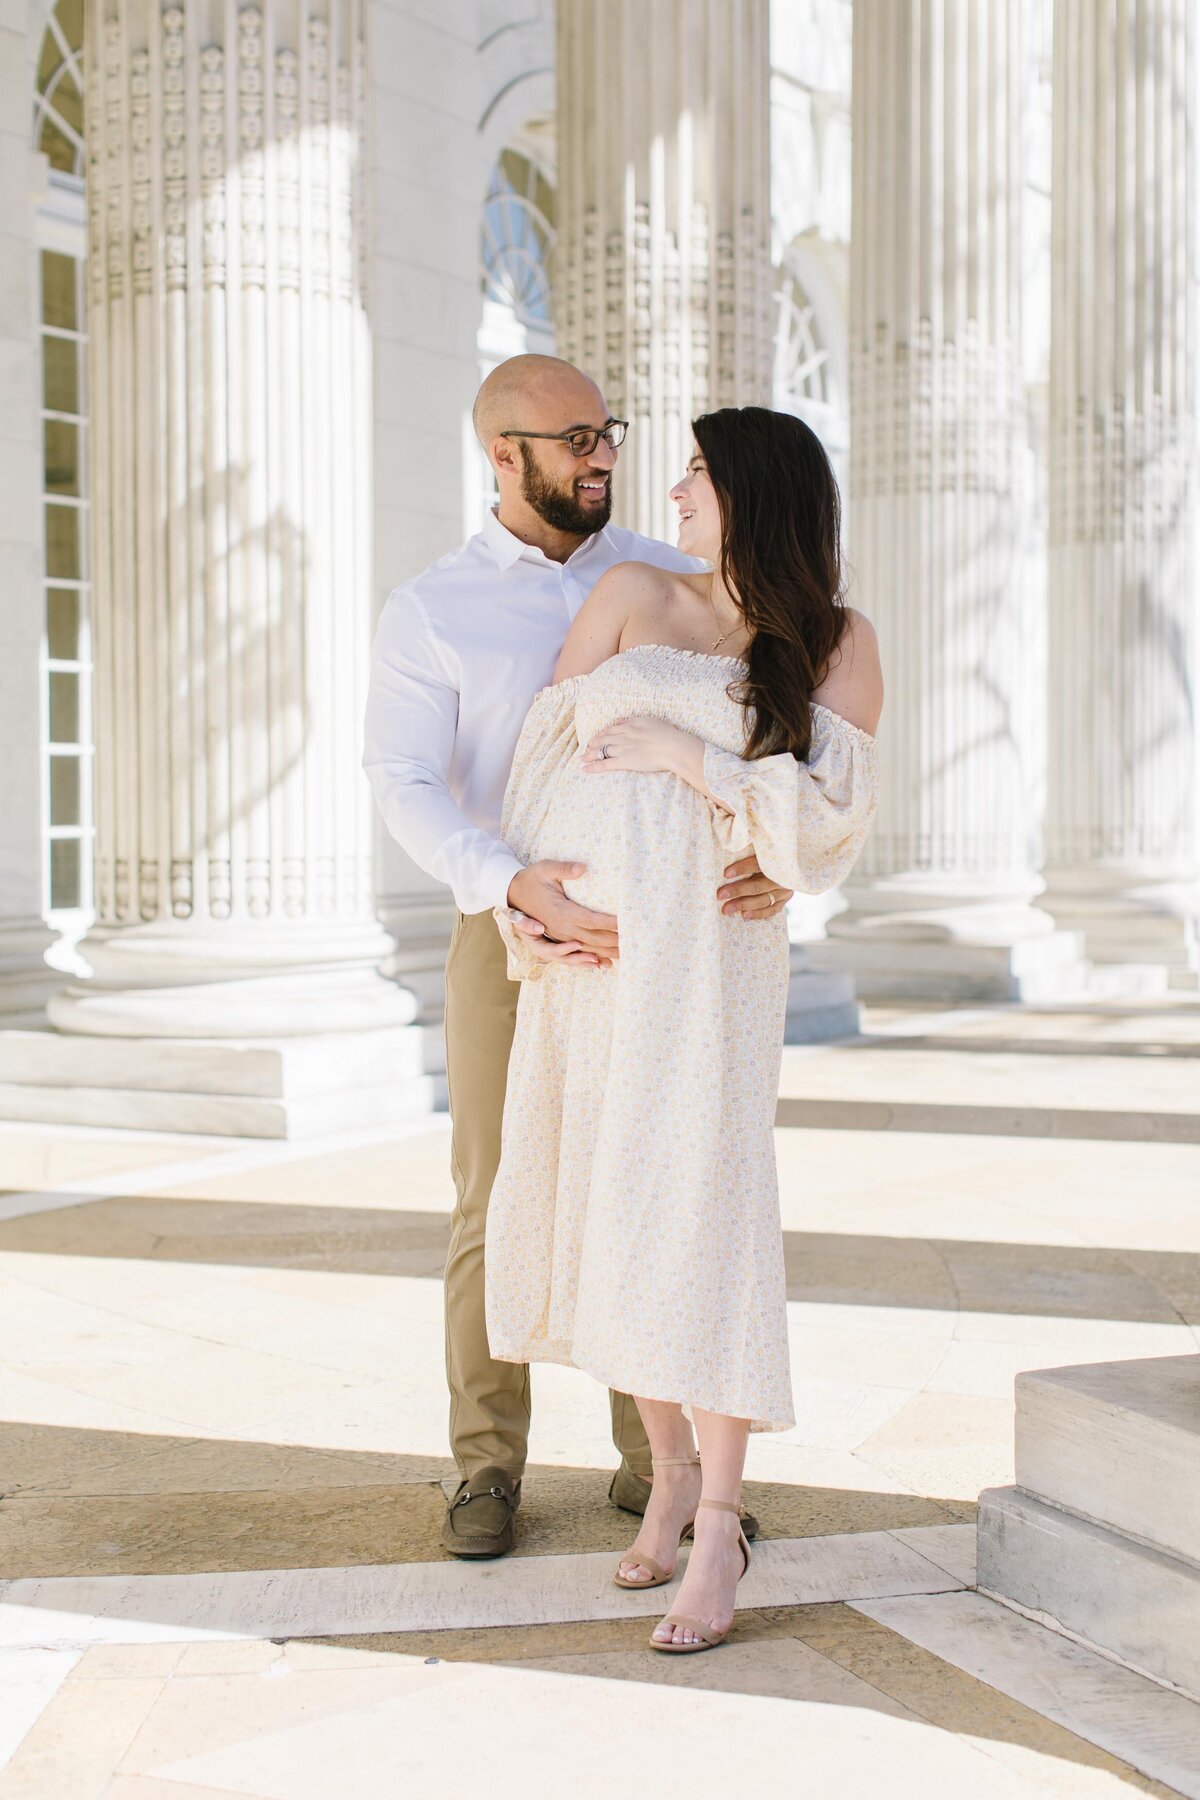 Woman holding baby bump with husband smiling behind her during photography session